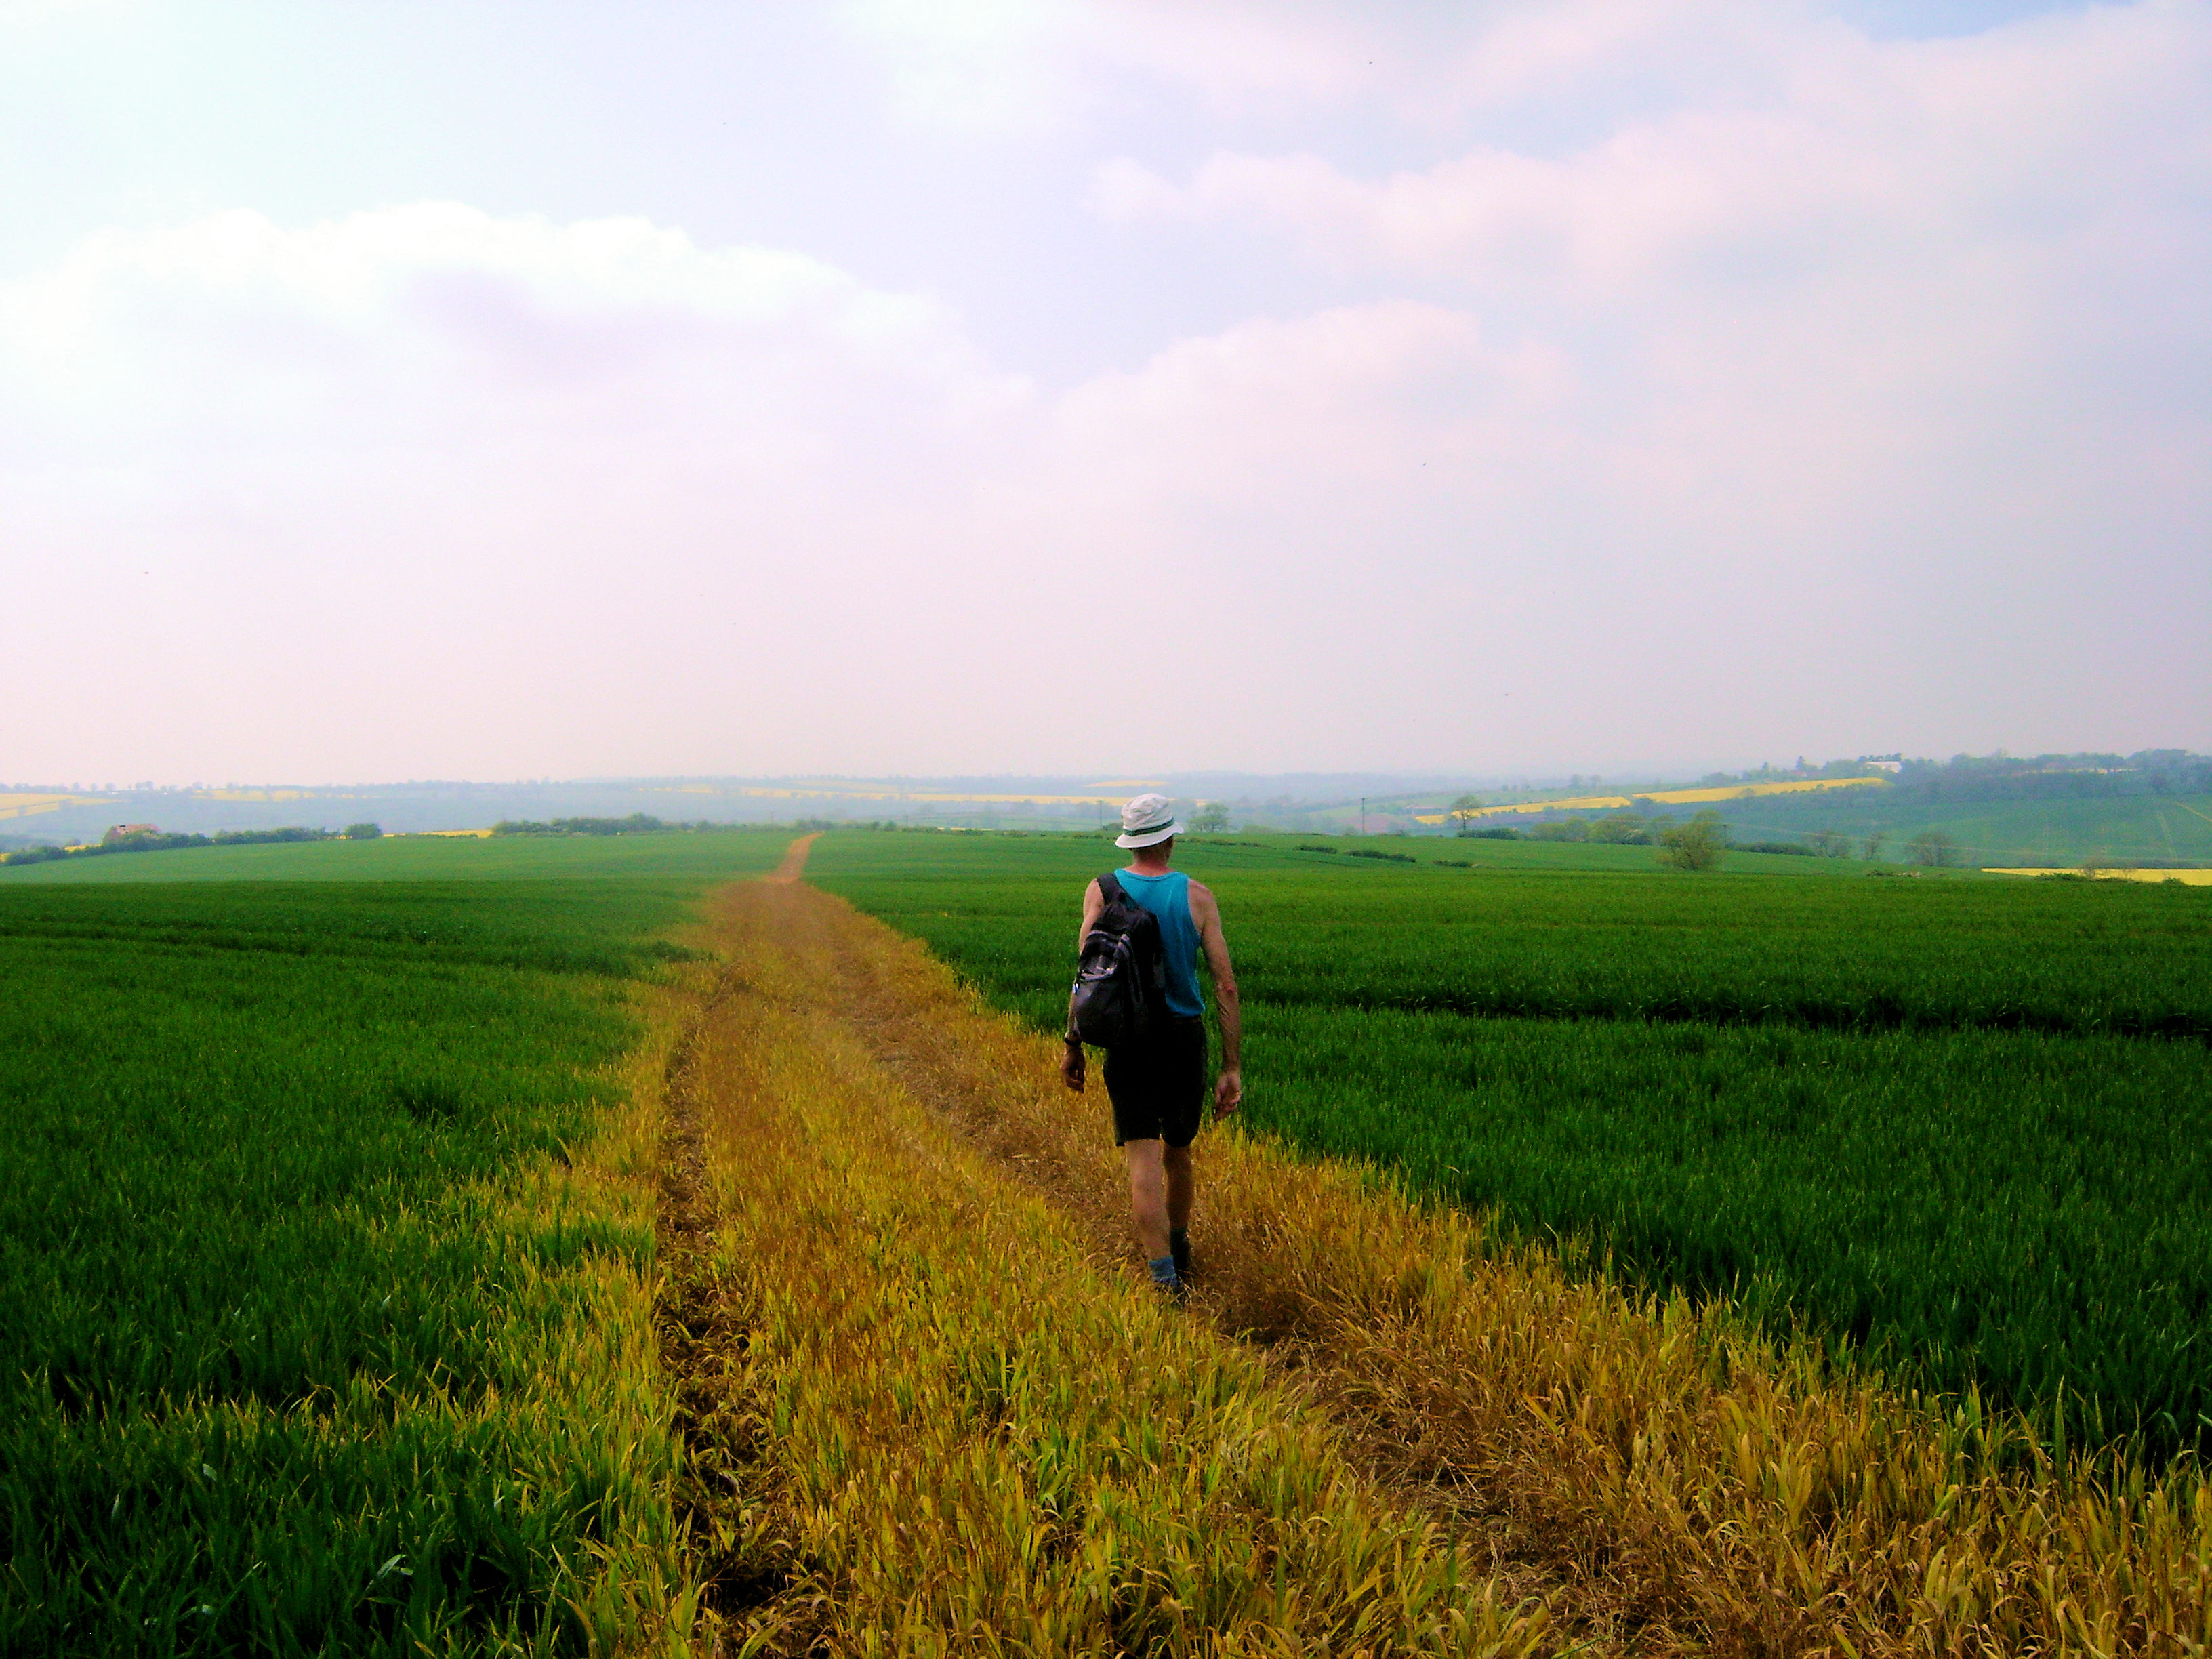 Ken crosses a large field on the way back